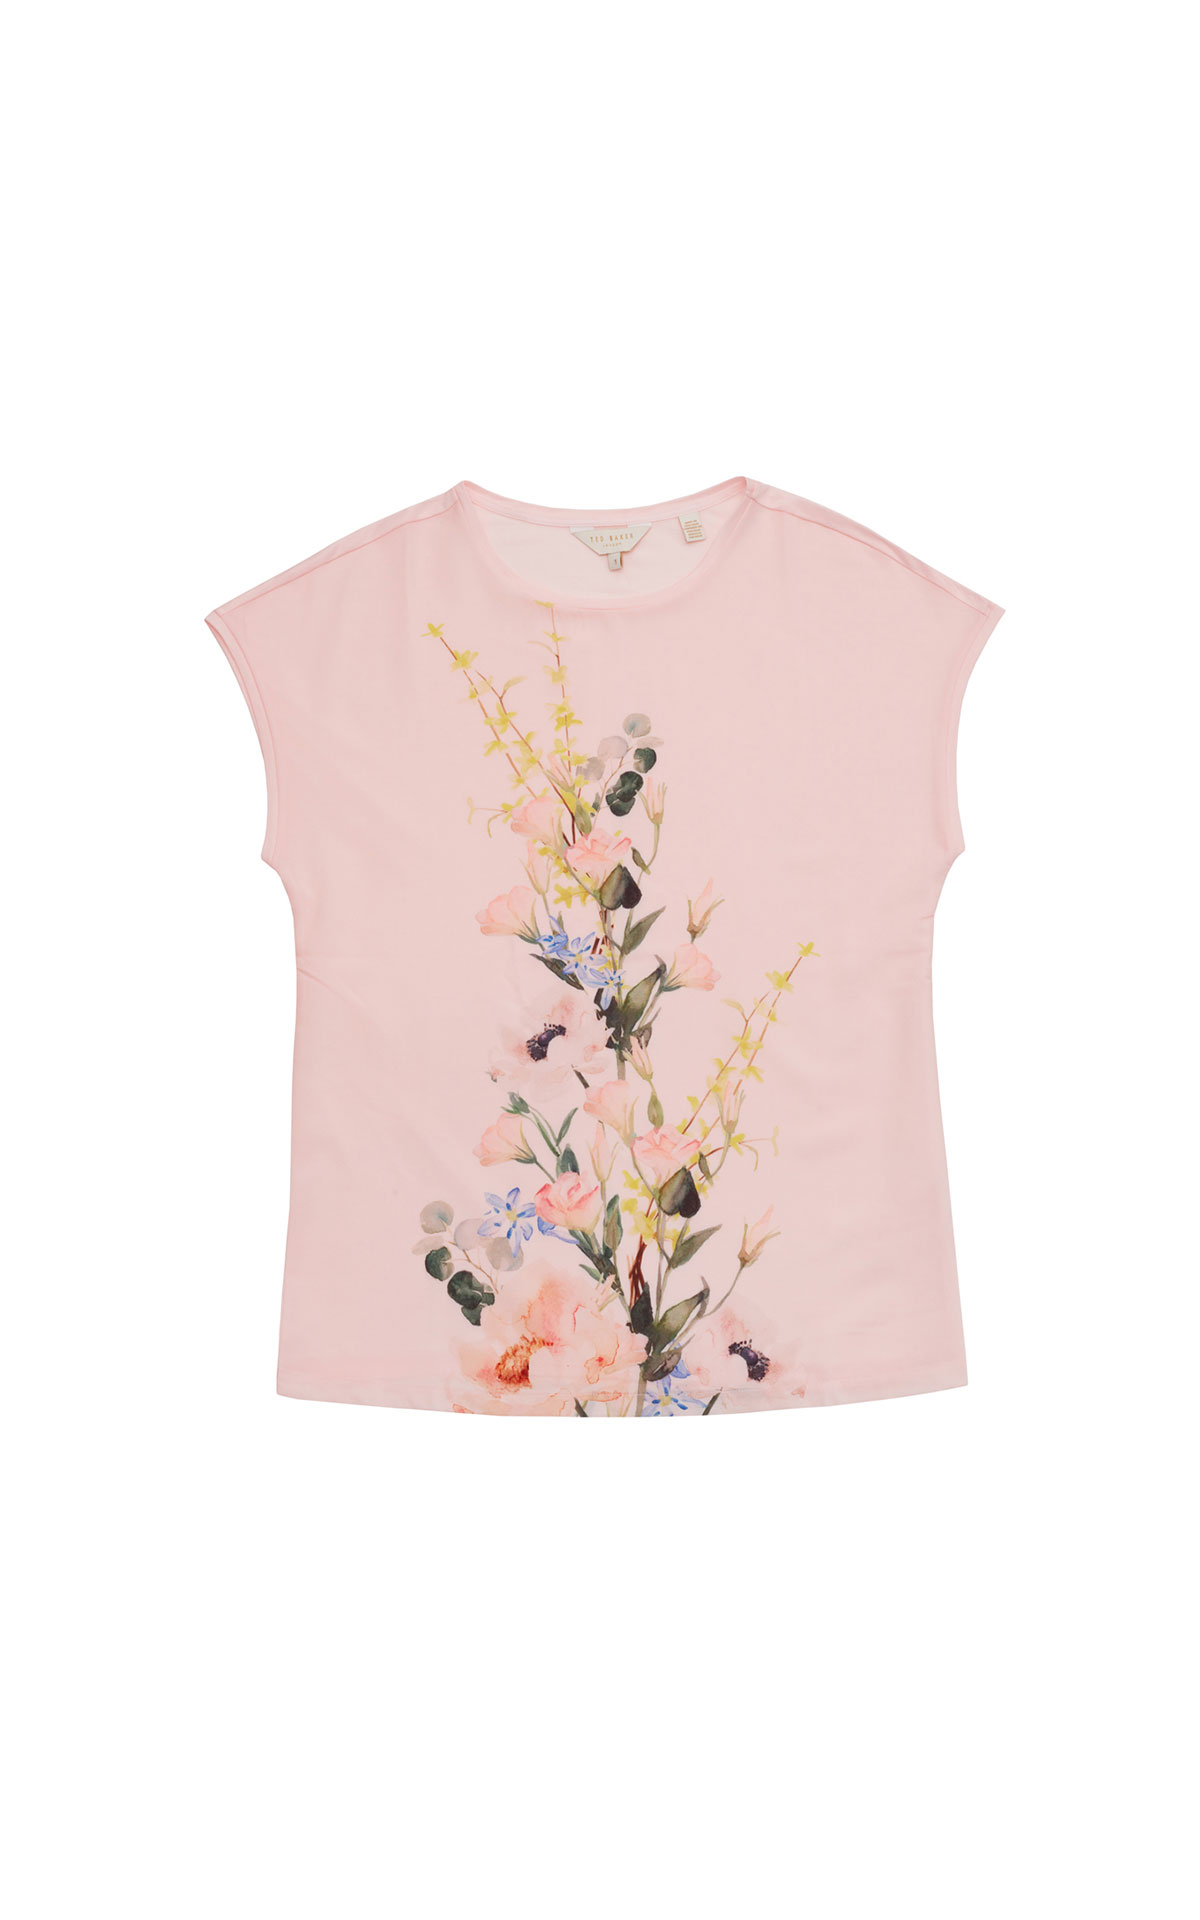 Ted Baker Front printed floral tee from Bicester Village